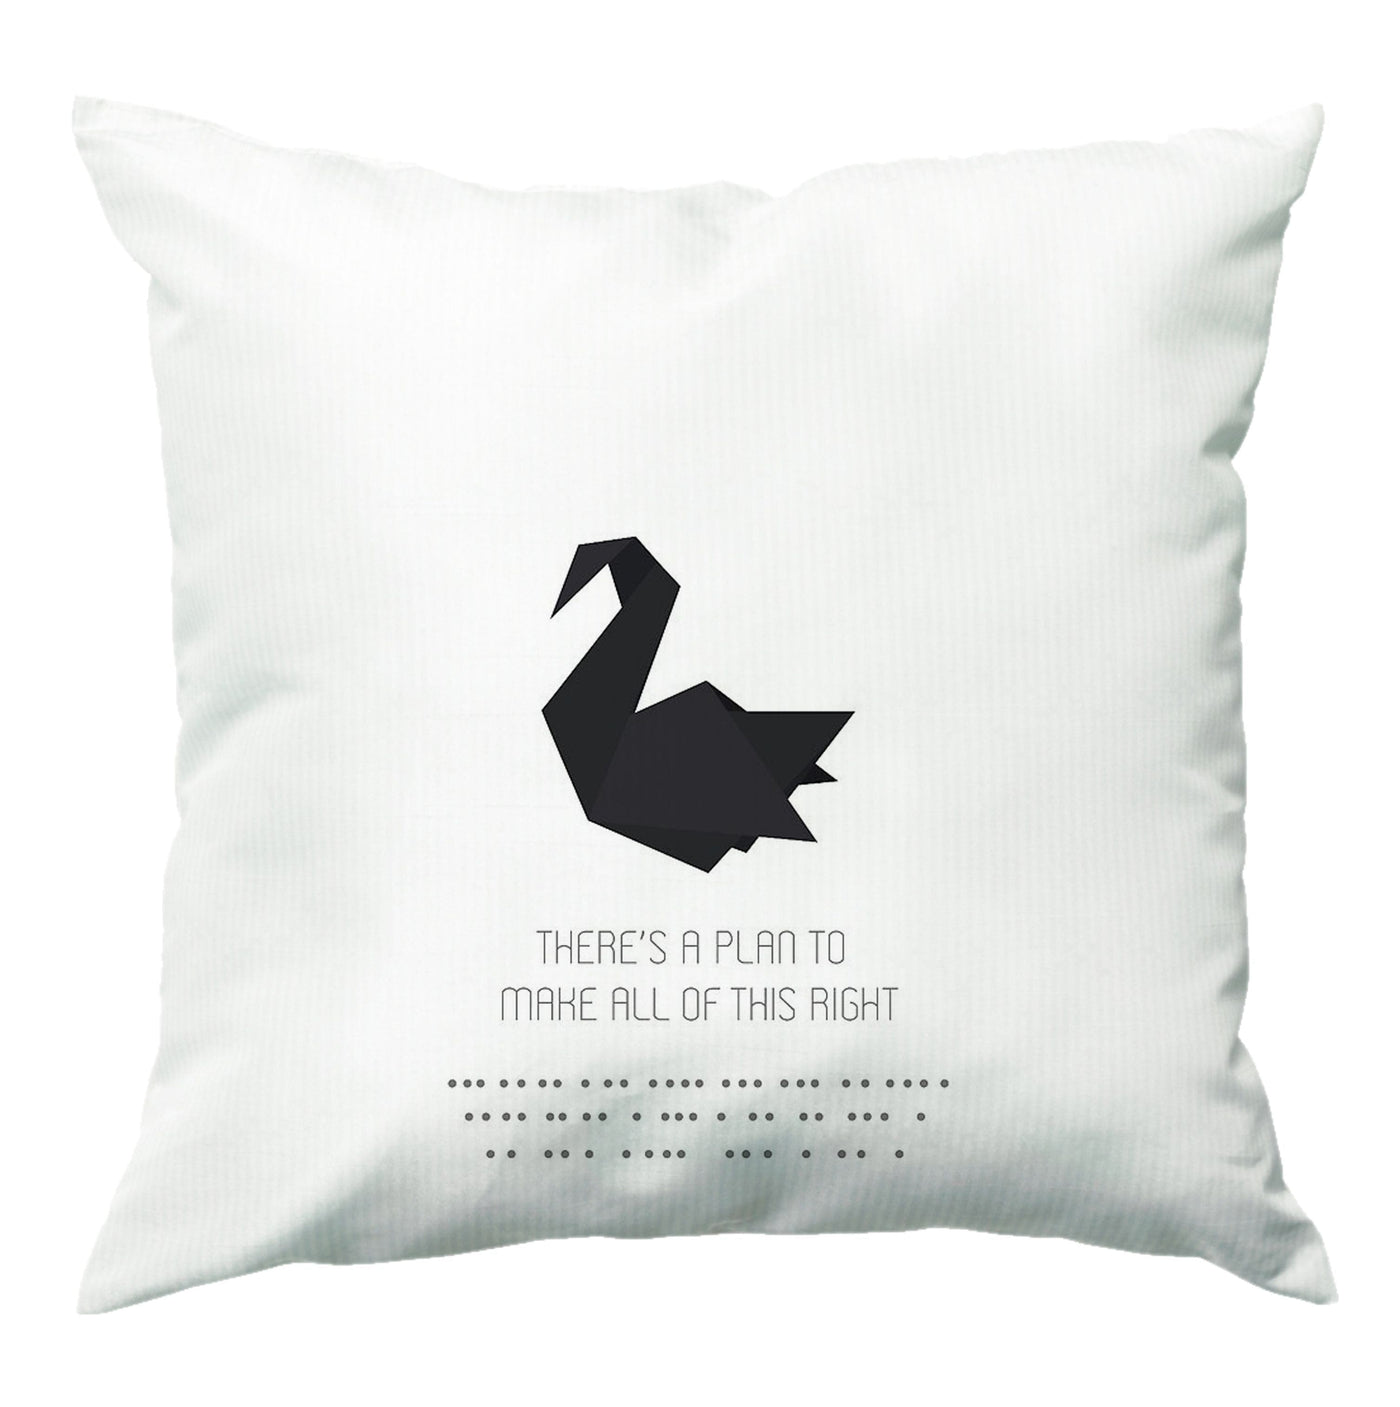 There's a Plan To Make all of This Right - Prison Break Cushion